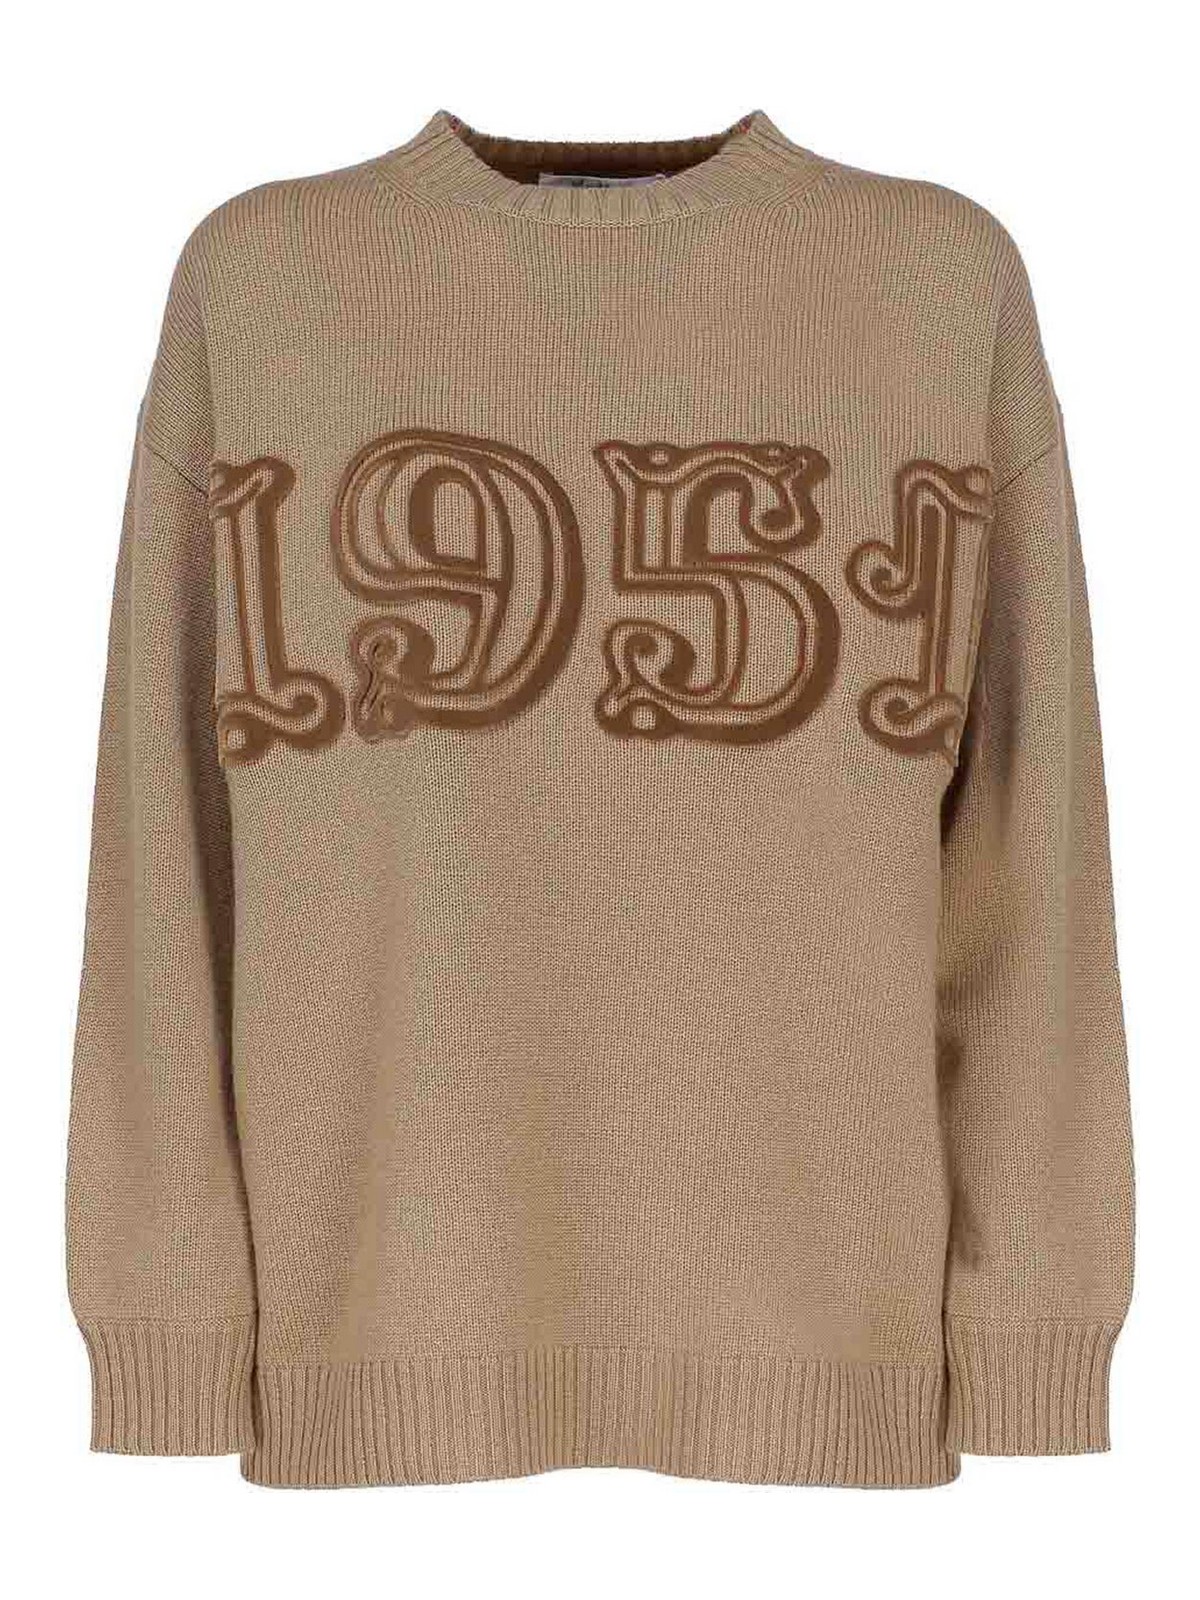 Max Mara Sweater In Wool And Cashmere In Brown